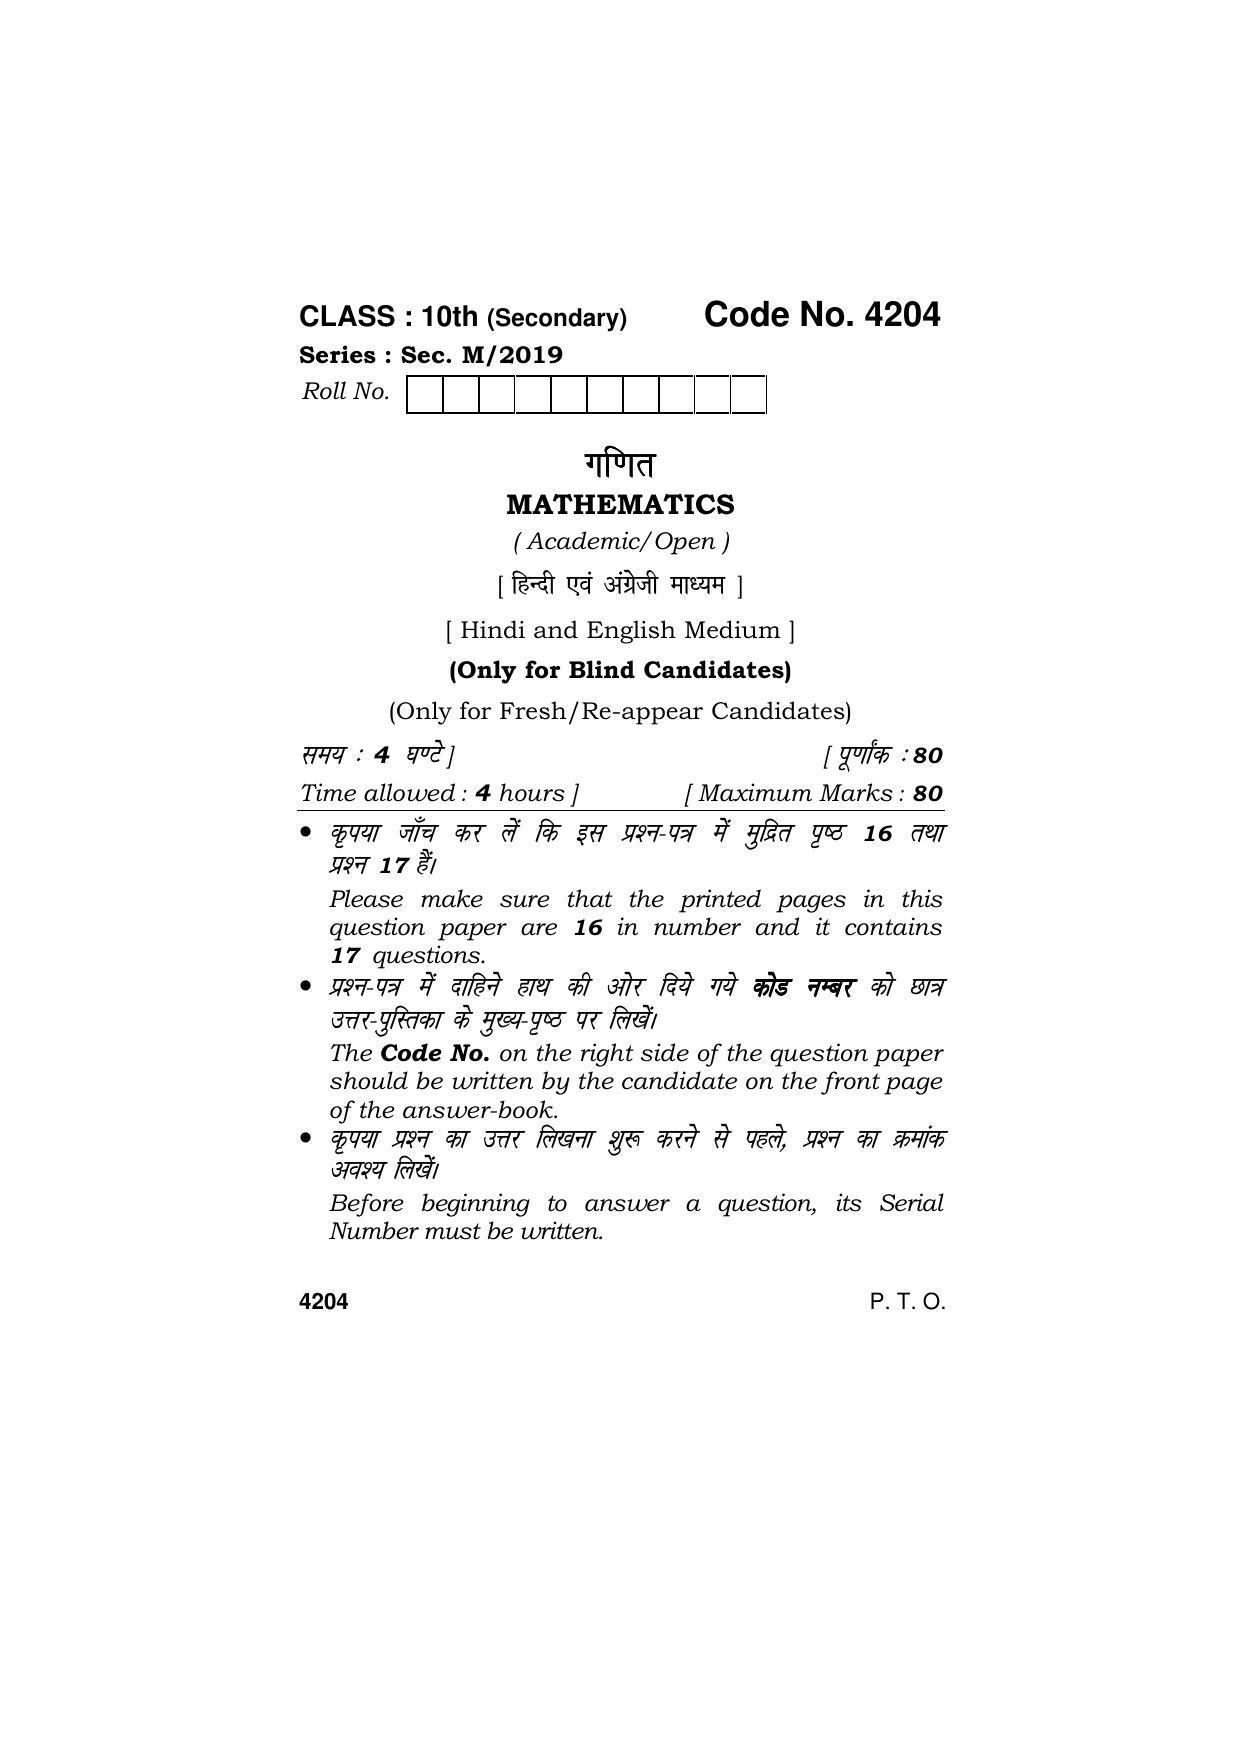 Haryana Board HBSE Class 10 Mathematics (Blind c) 2019 Question Paper - Page 1